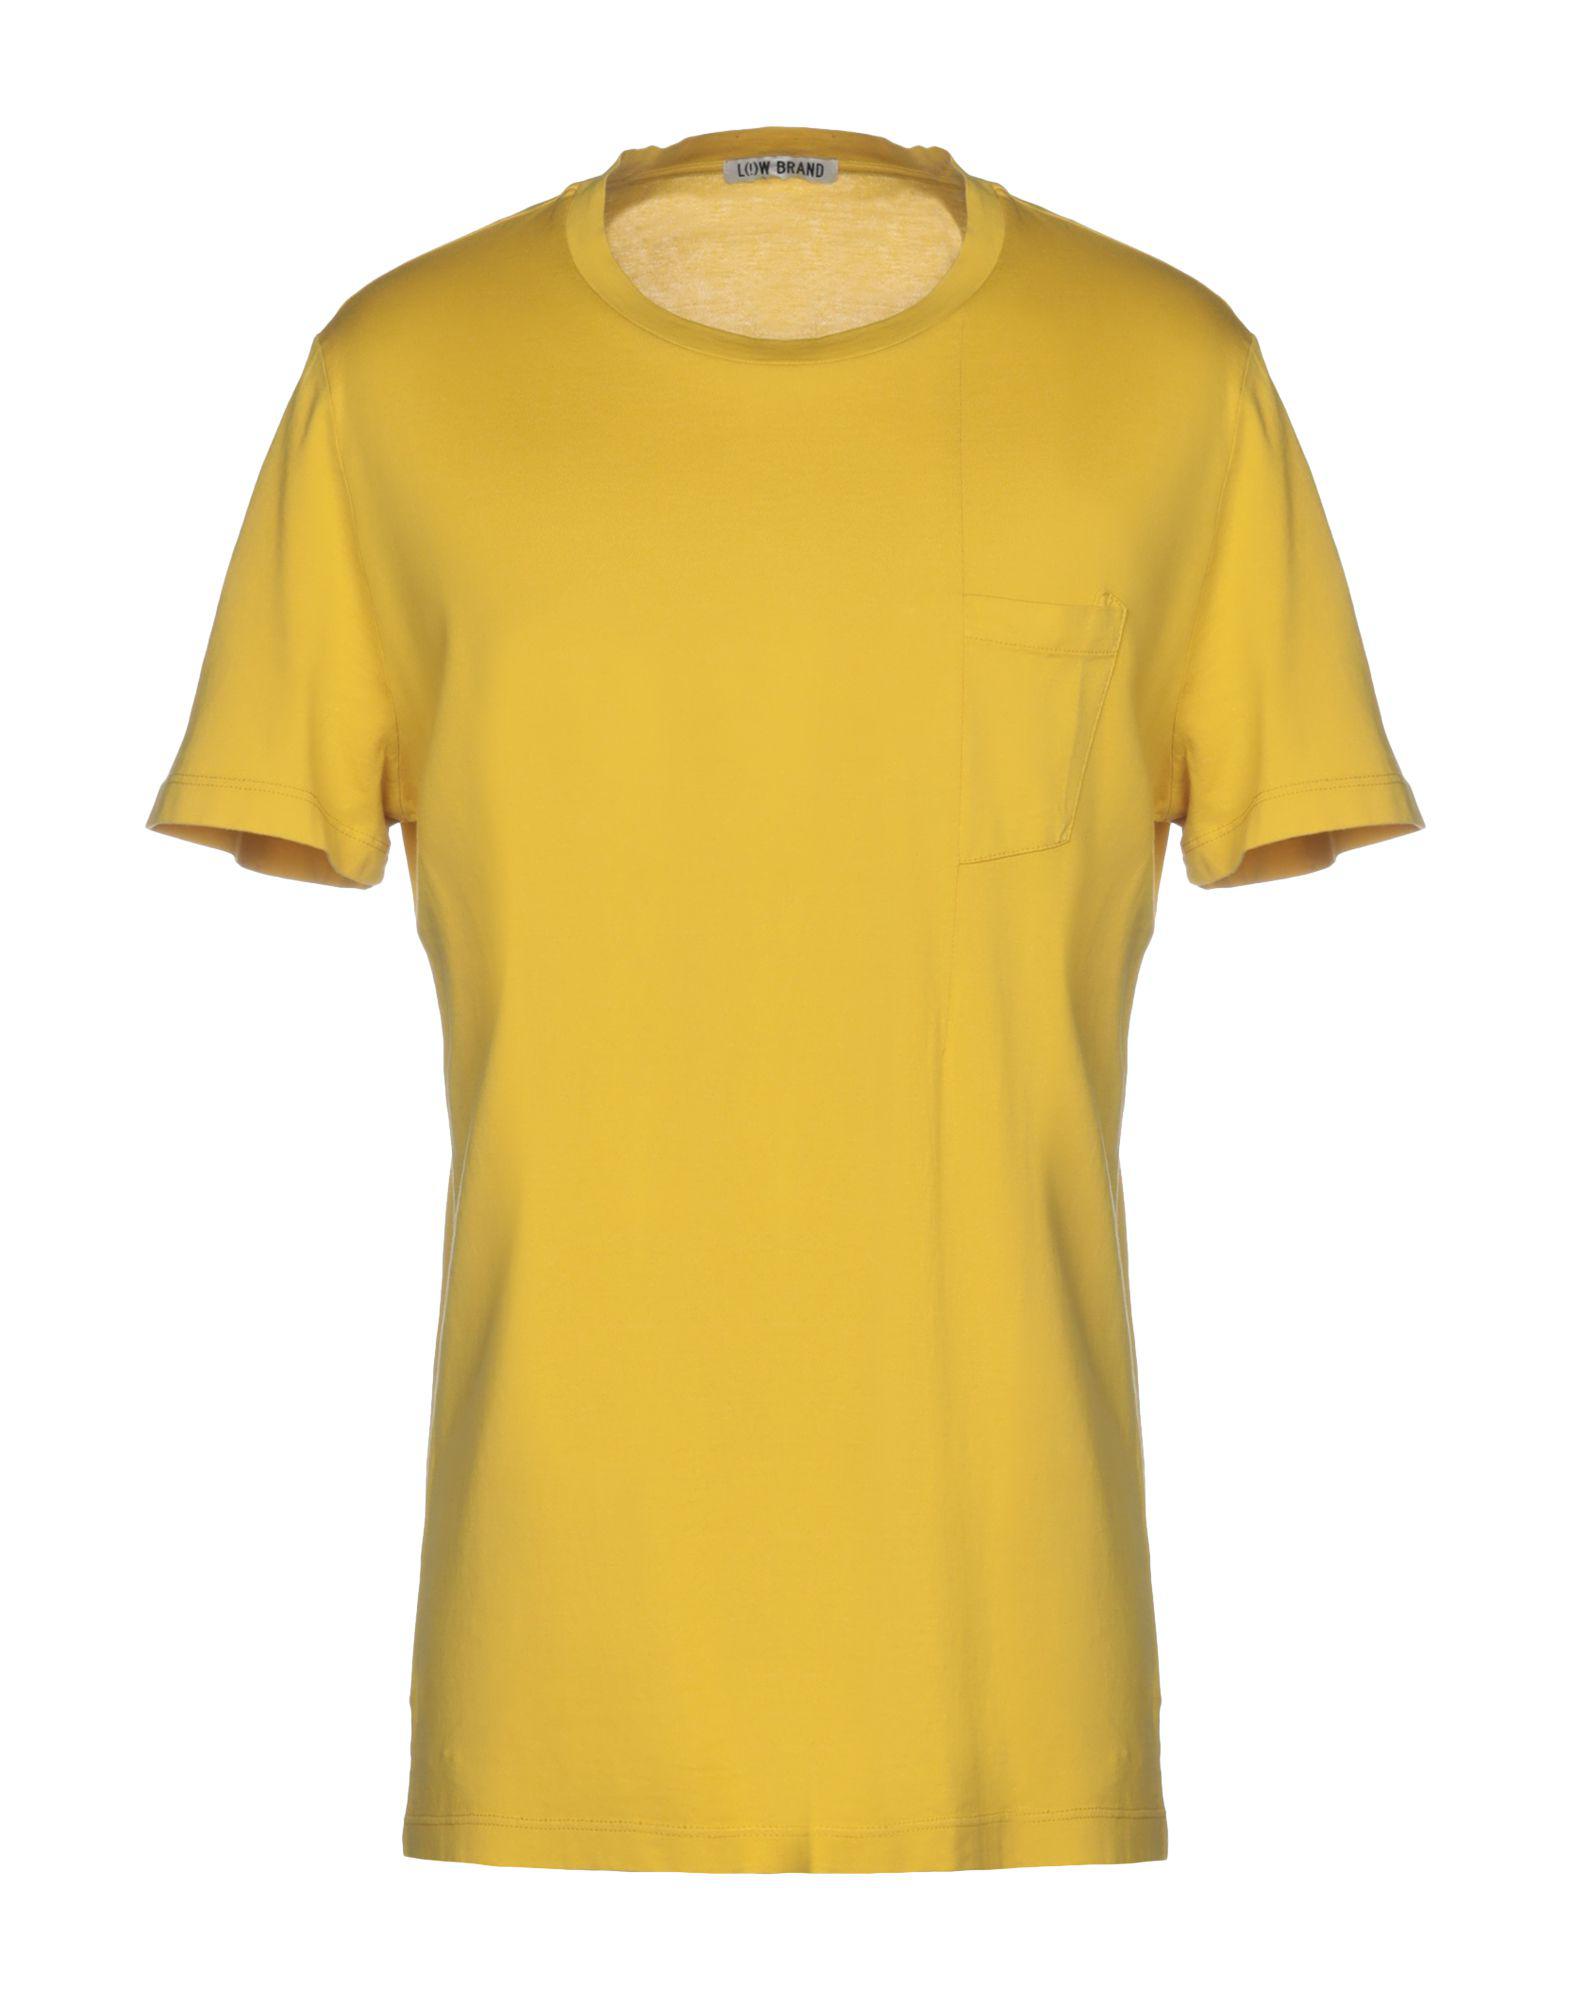 Lyst - Low Brand T-shirts in Yellow for Men